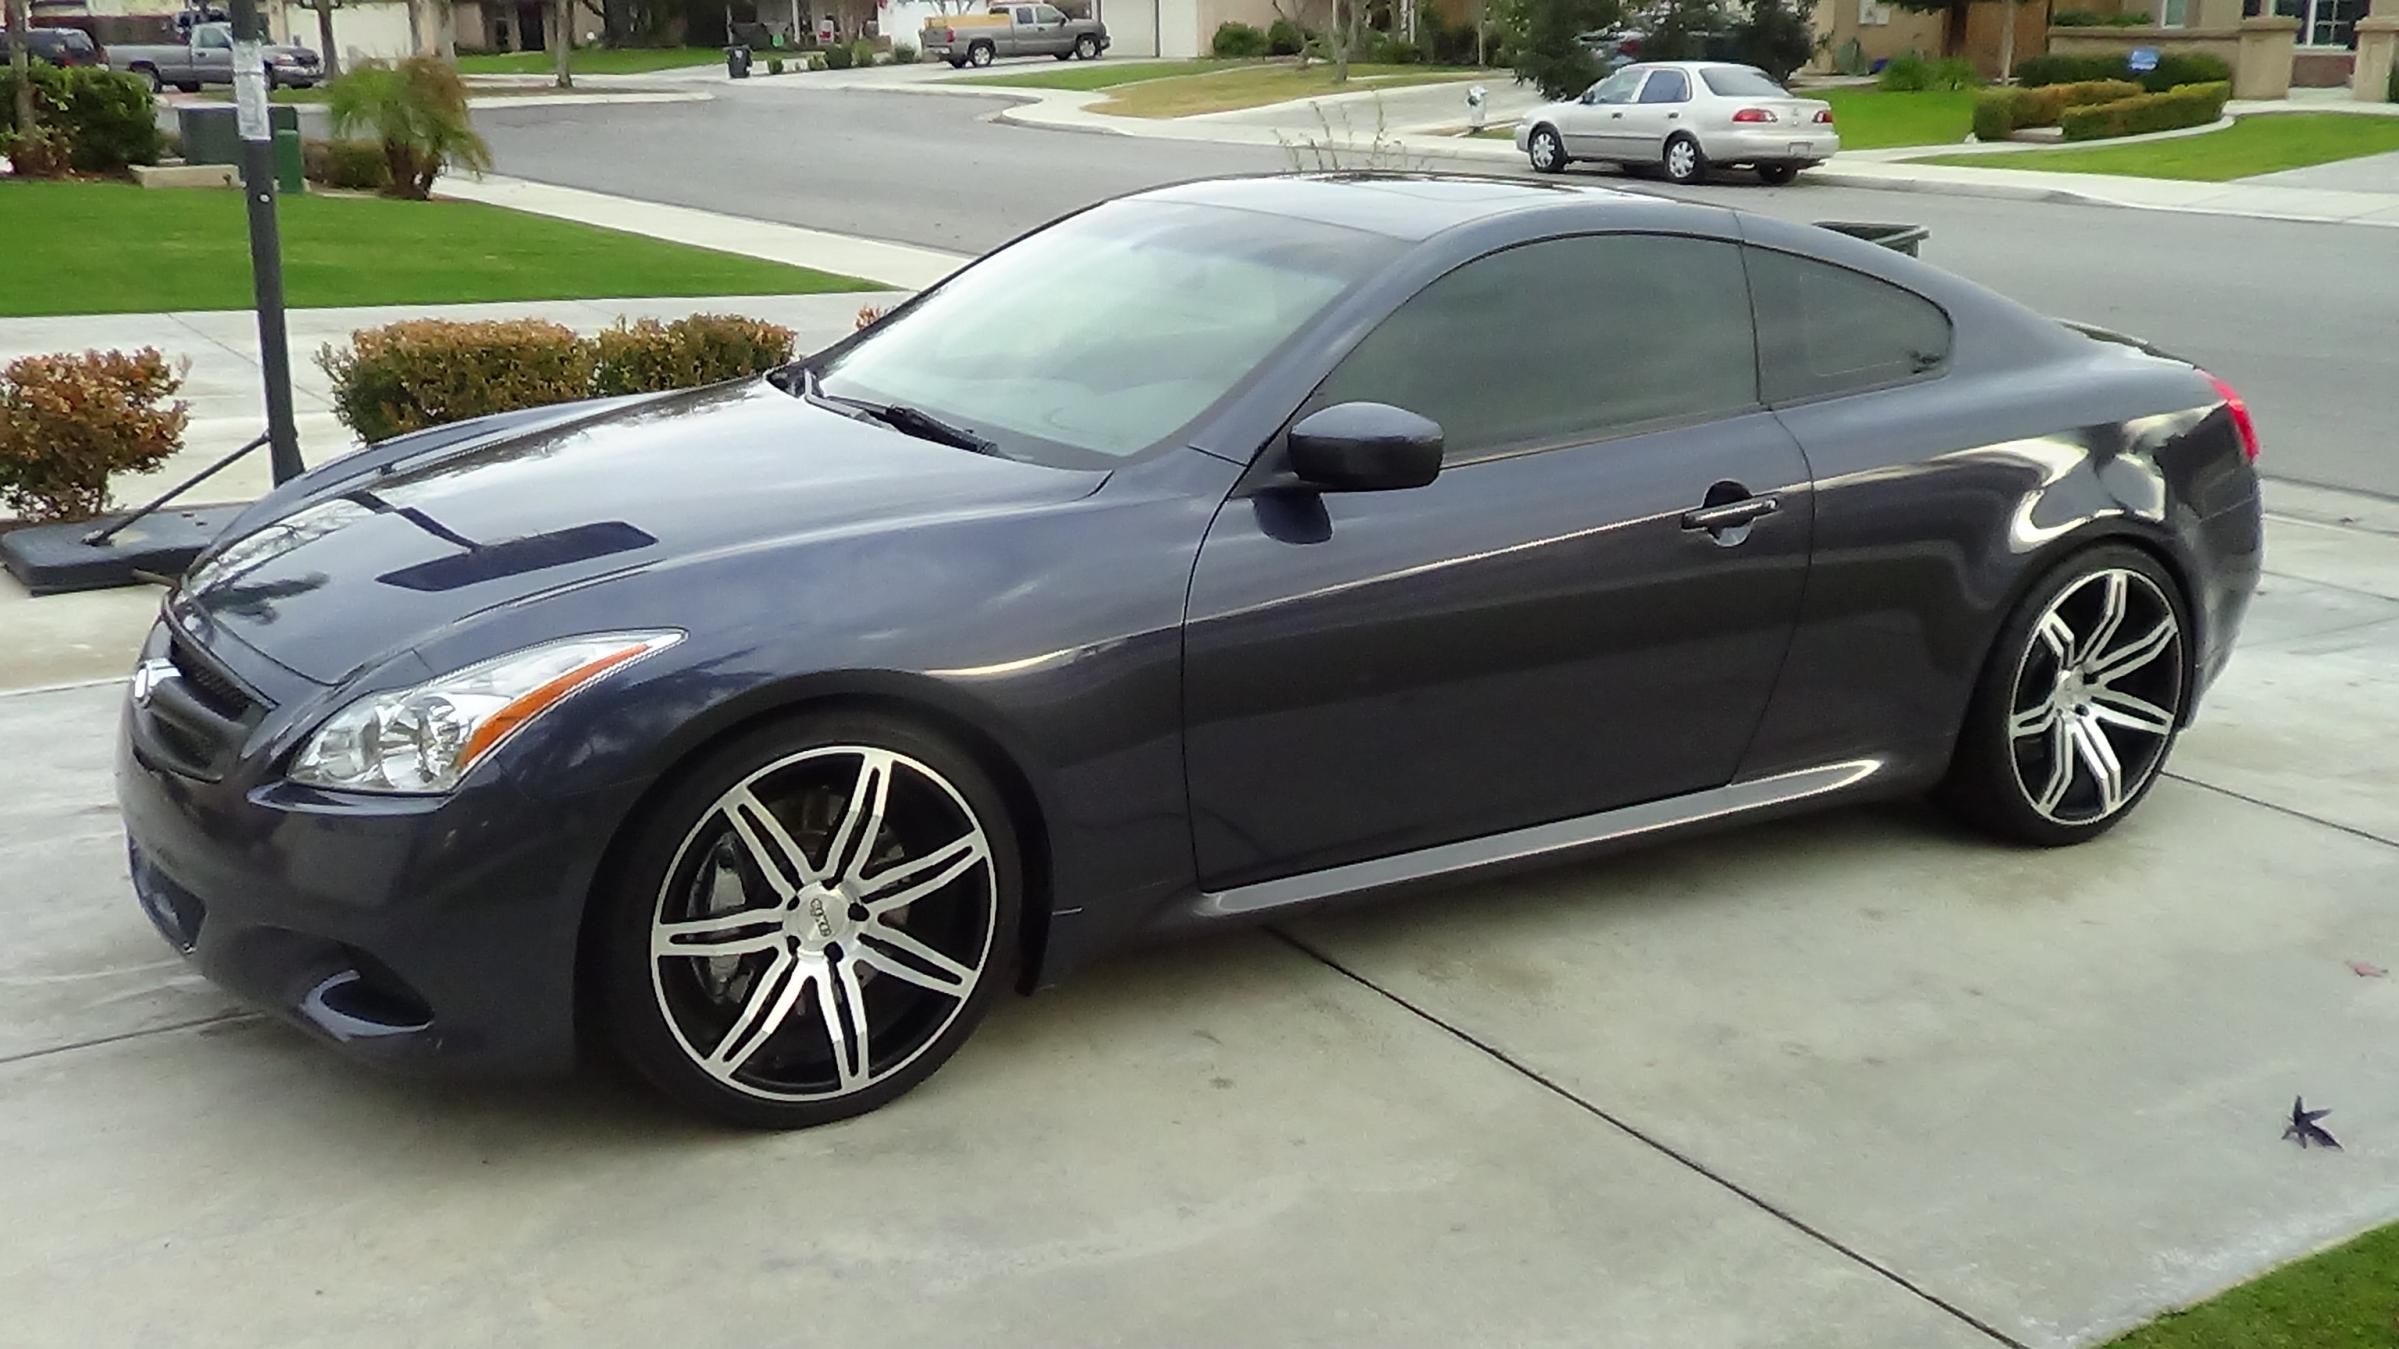 For Sale 0839; Infiniti G37S CA car Moderately modded  MyG37